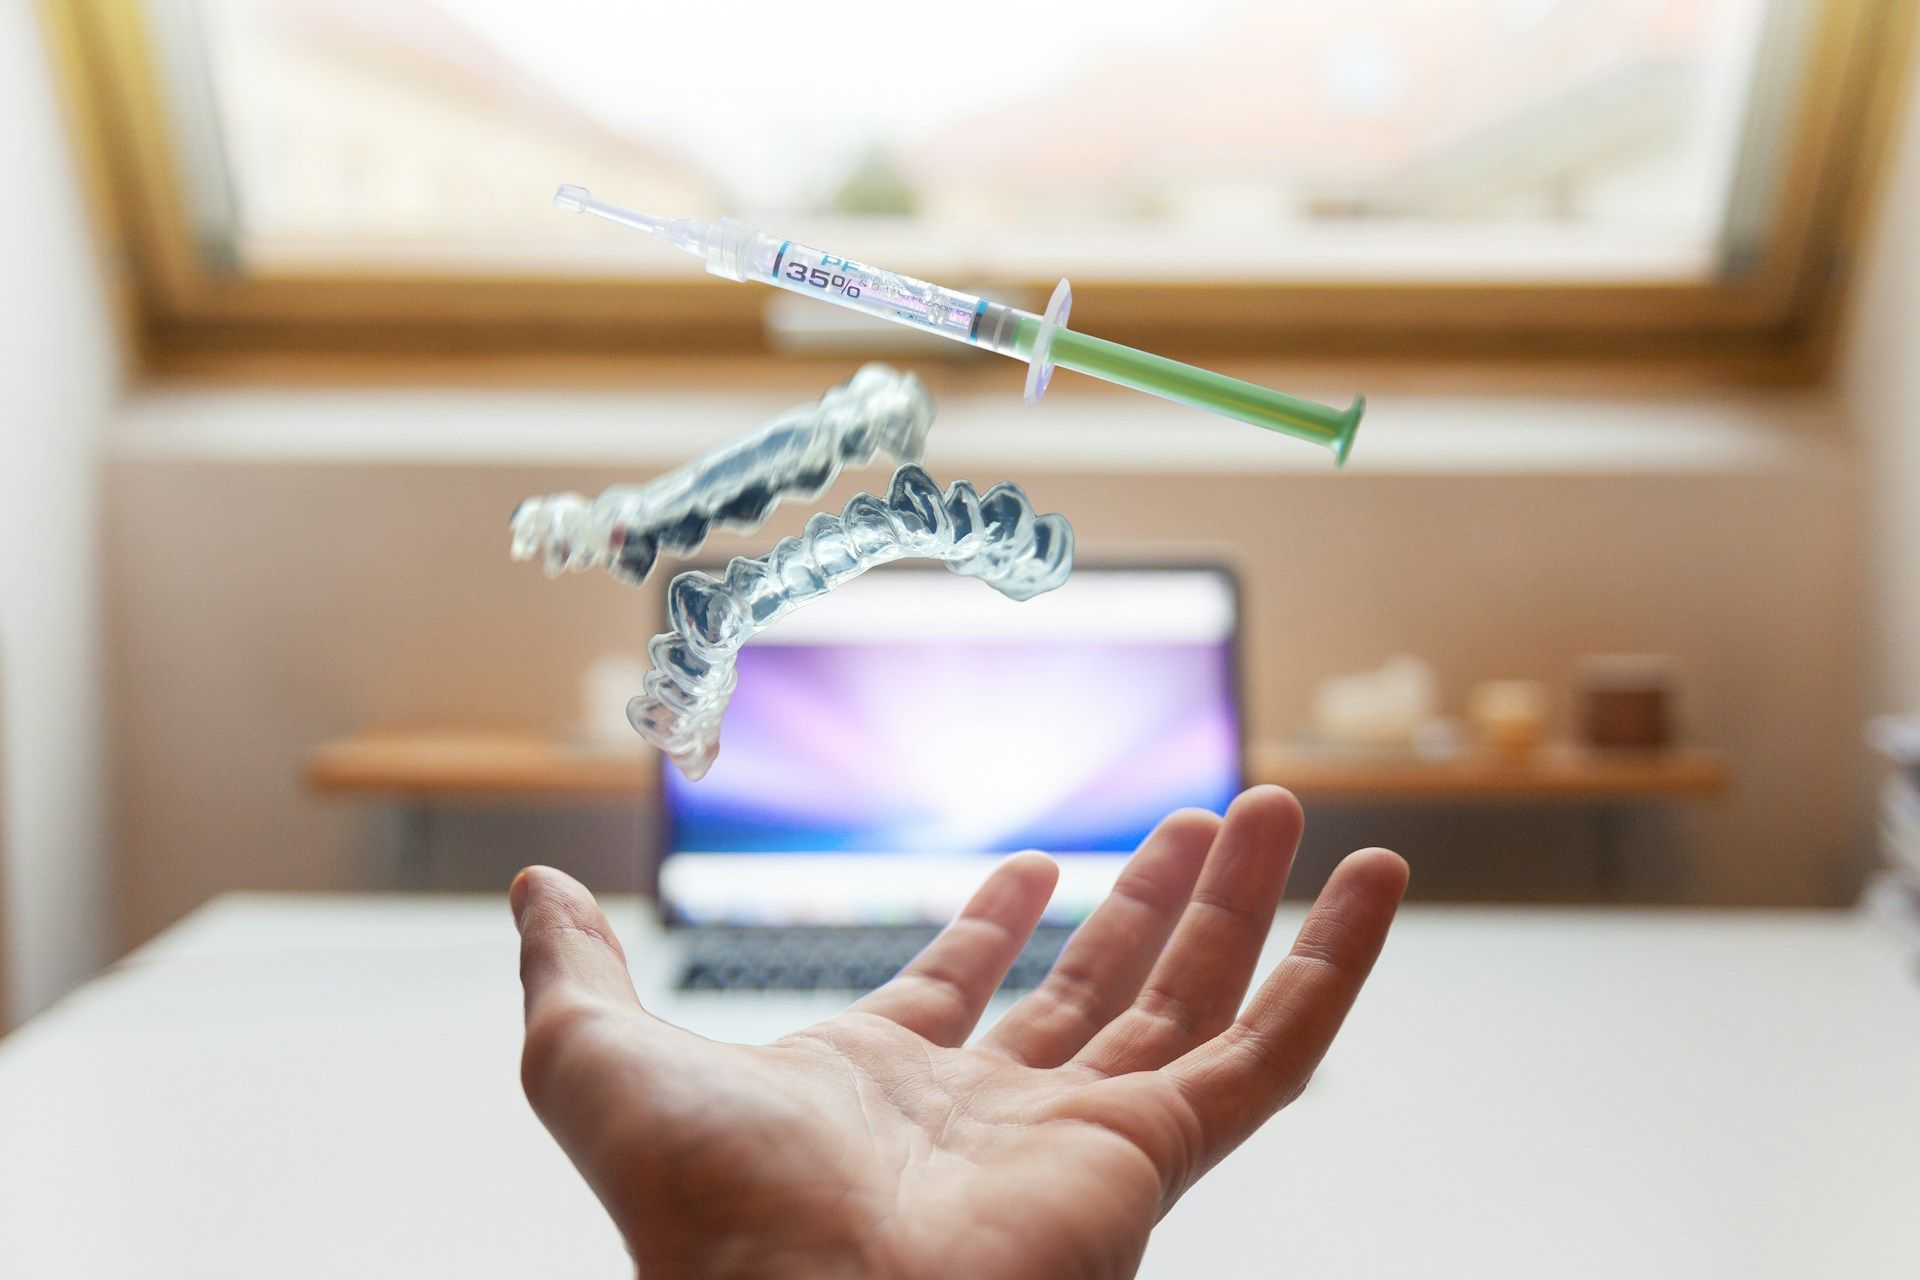 A hand is holding a syringe and Invisalign clear braces in front of a laptop.